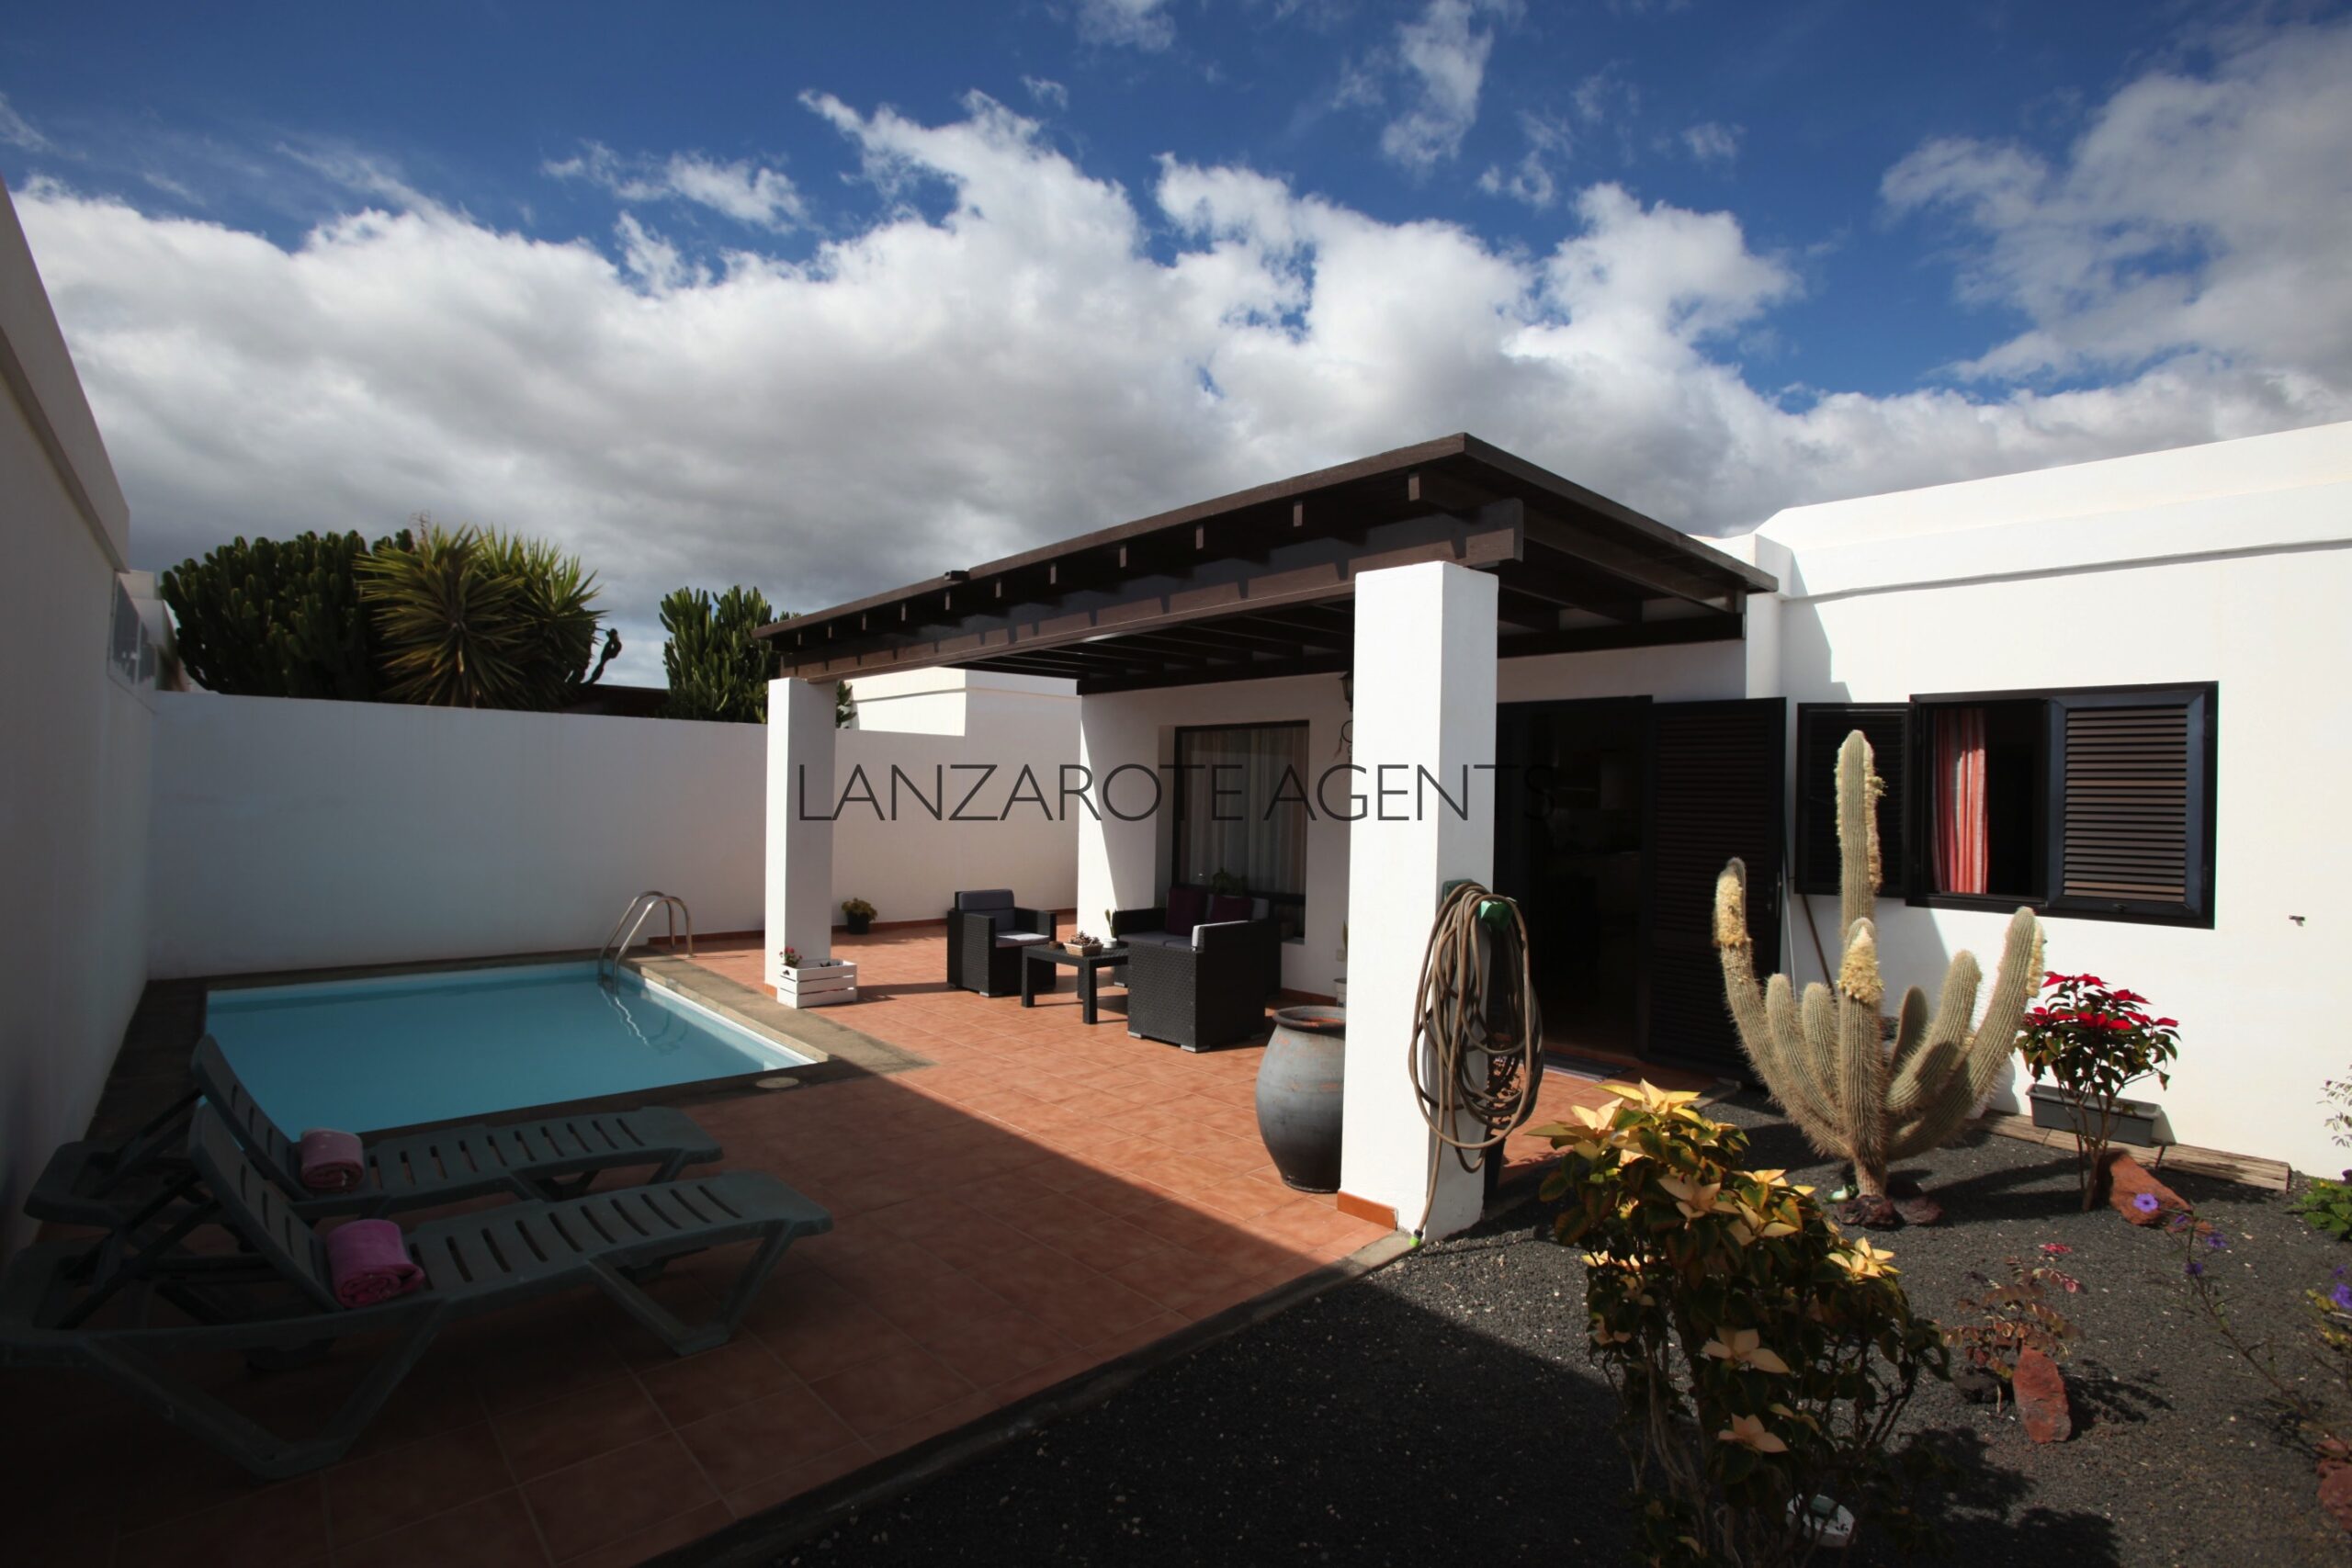 Immaculate Semi Detached 3 Bedroom Villa With Private Pool Near Marina Rubicon and Great Potential